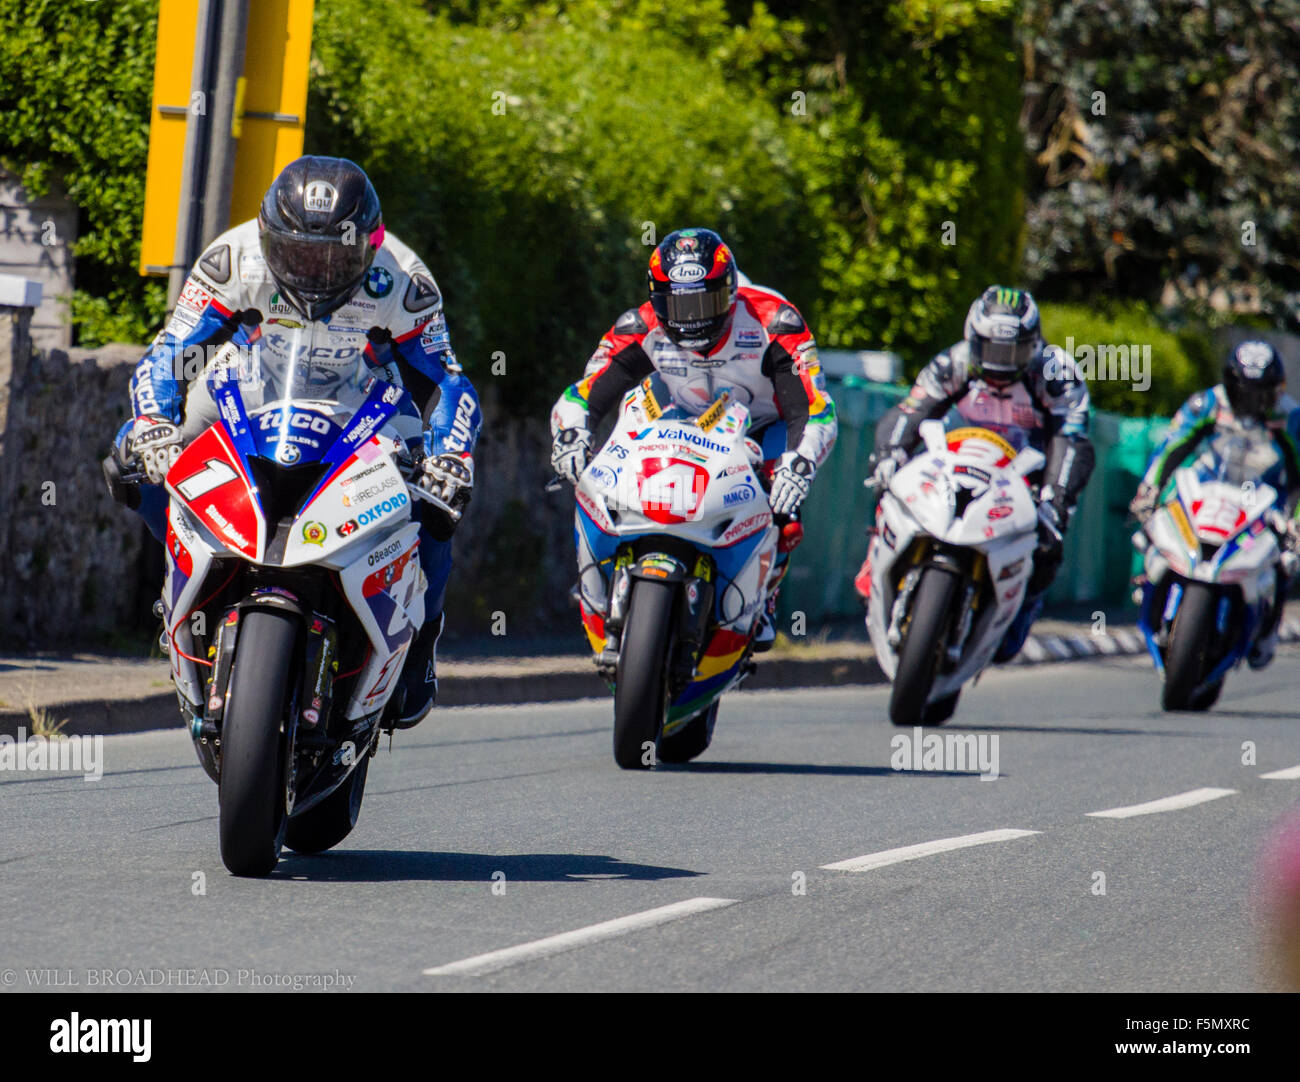 Guy Martin leads as the pack approaches Castletown corner in the 2015 Southern 100 Stock Photo